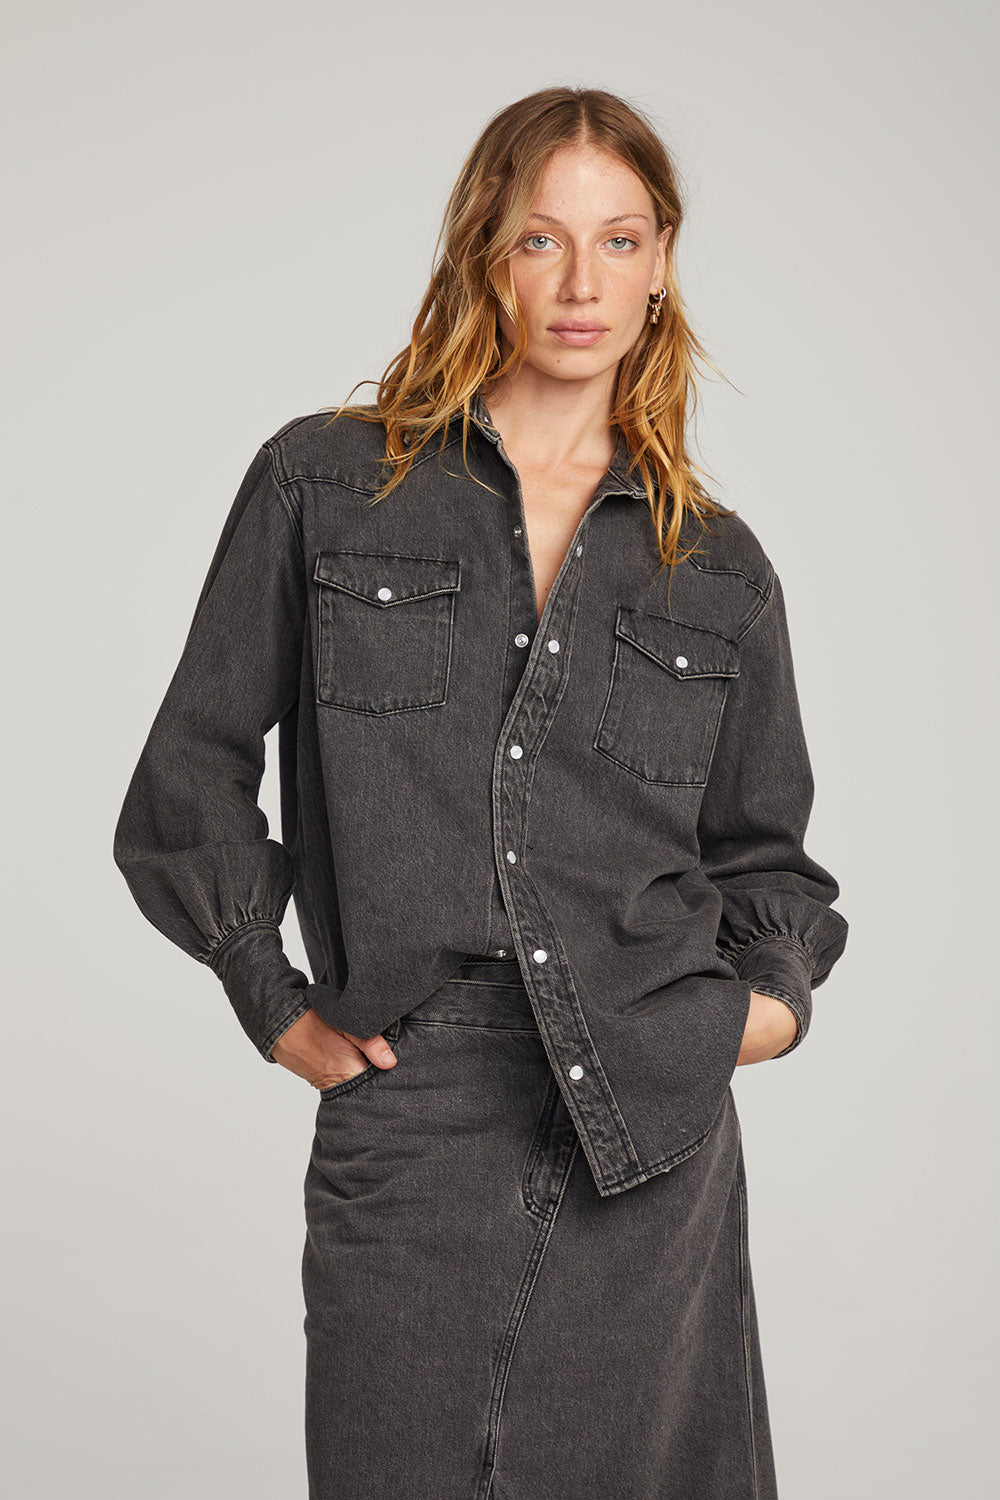 Elk Licorice Button Down WOMENS chaserbrand